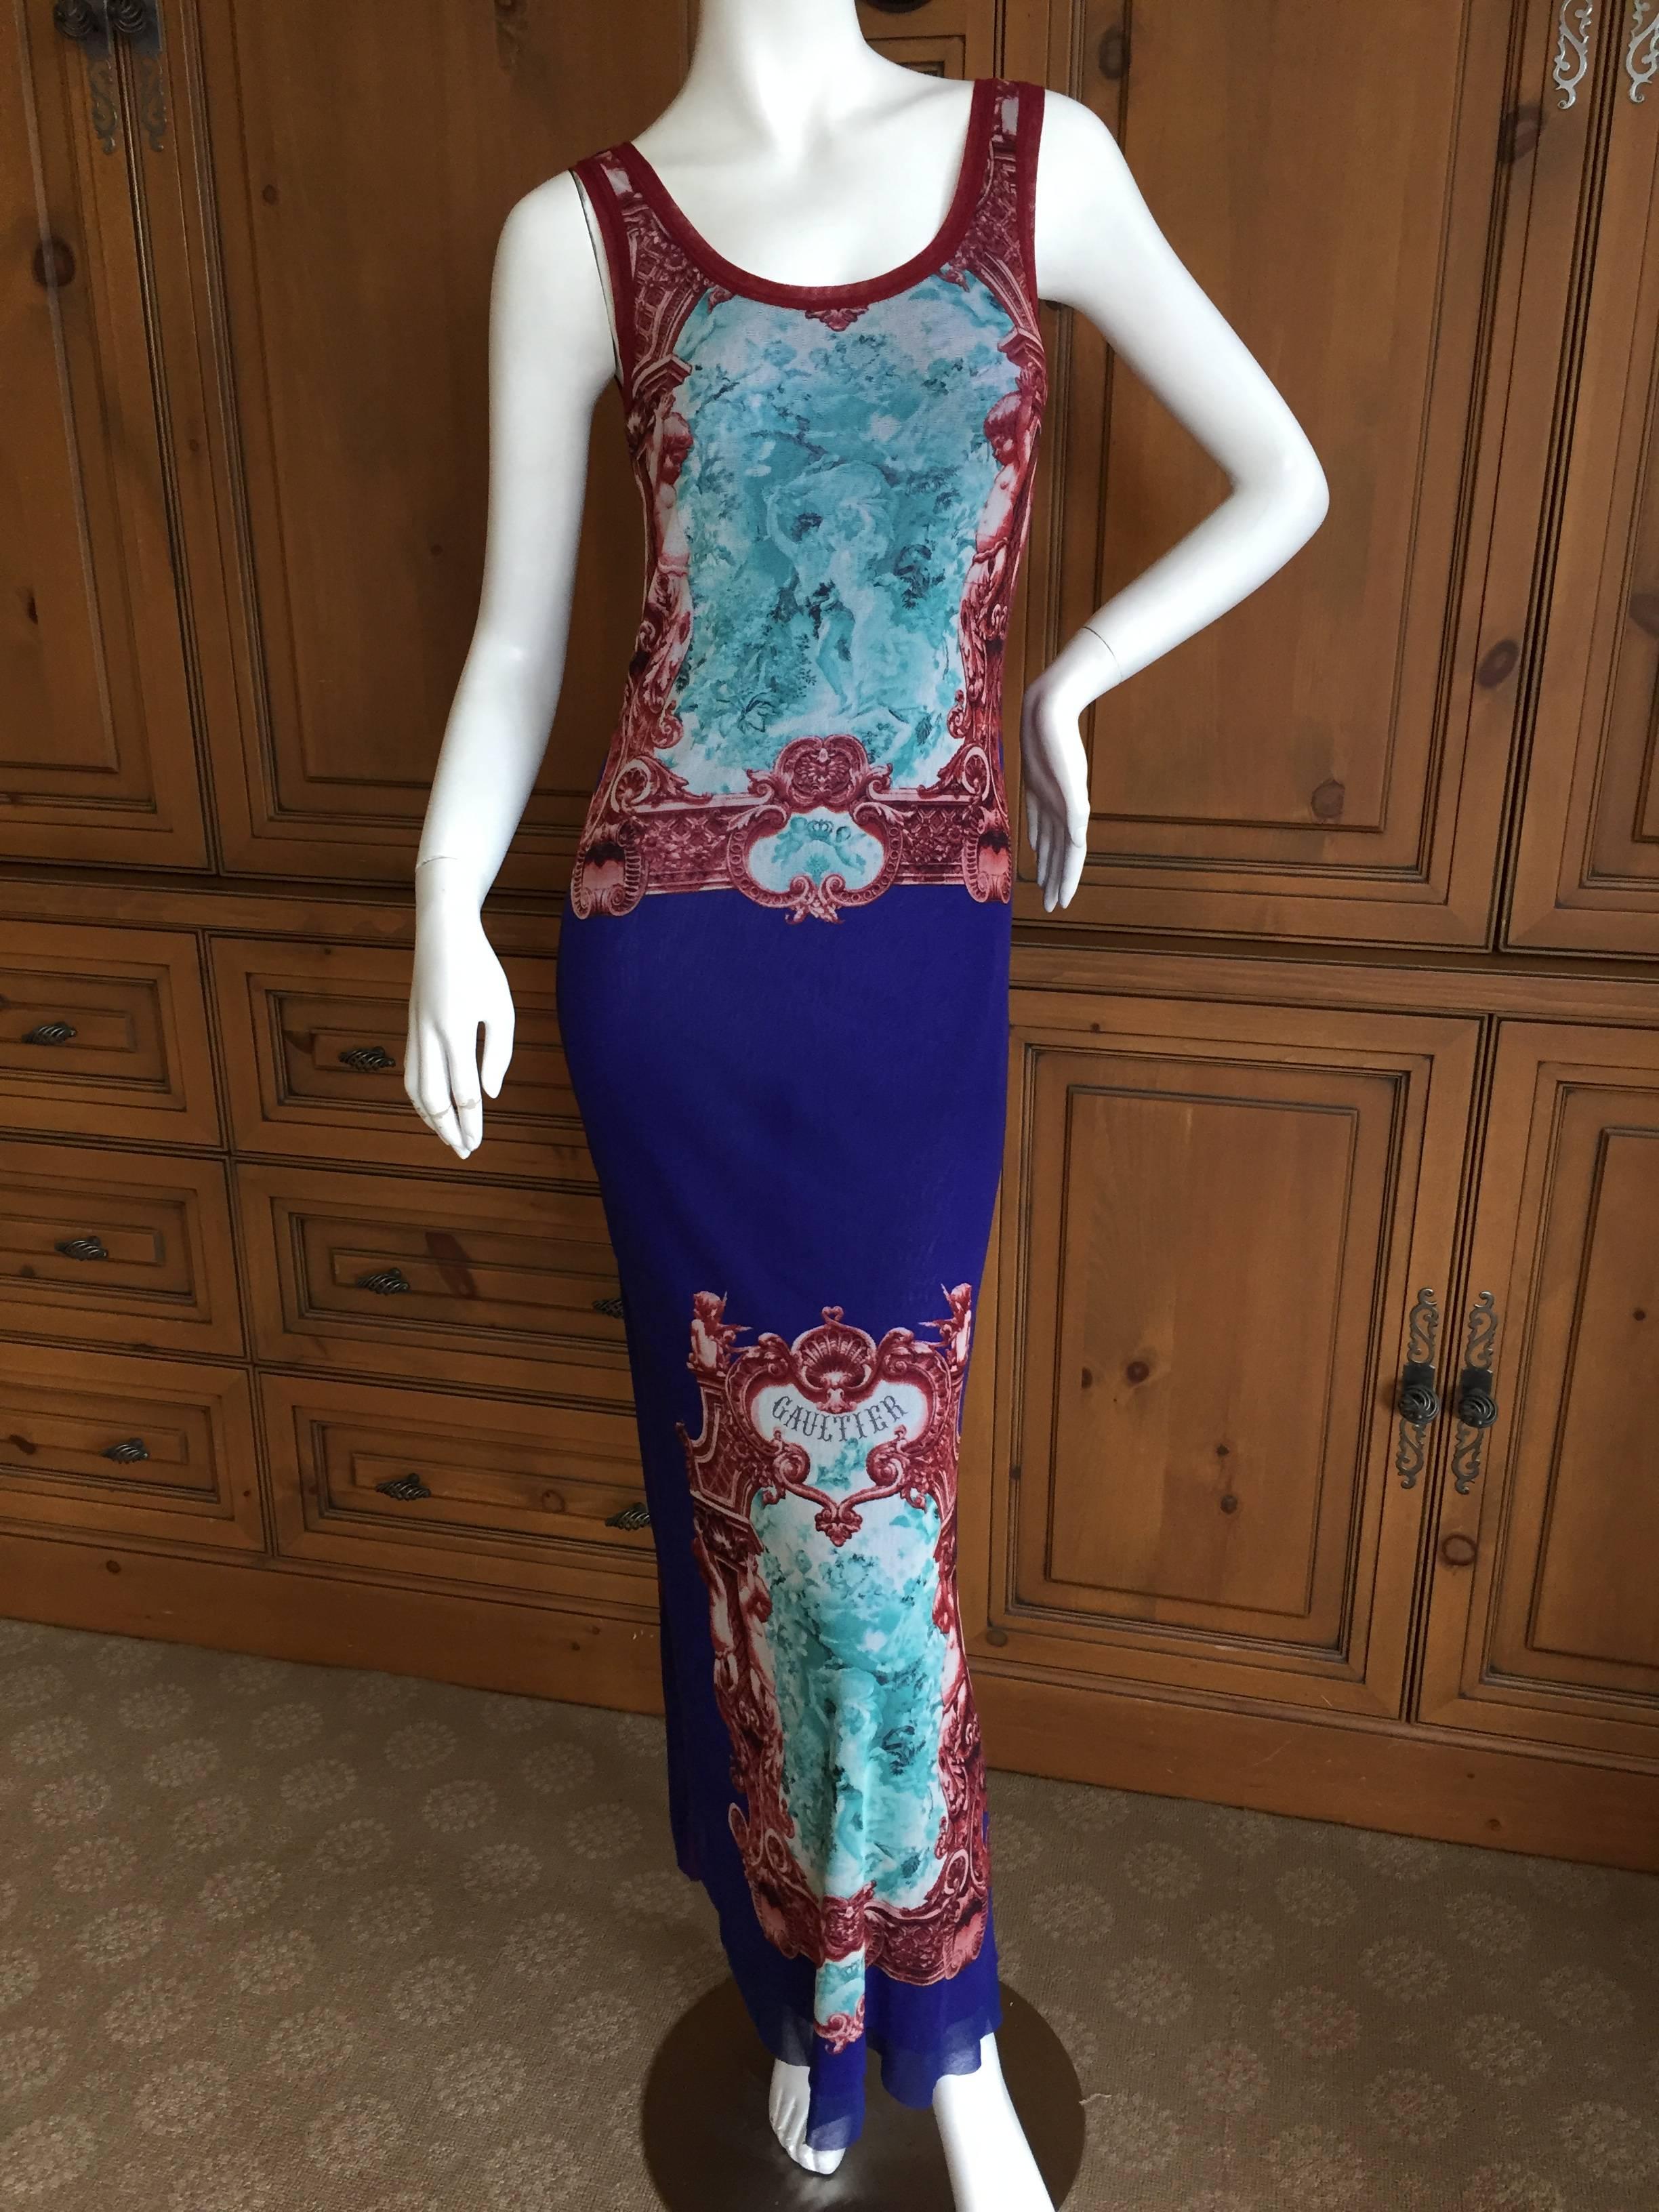 Jean Paul Gaultier Soleil Sleeveless Long Dress In Excellent Condition For Sale In Cloverdale, CA